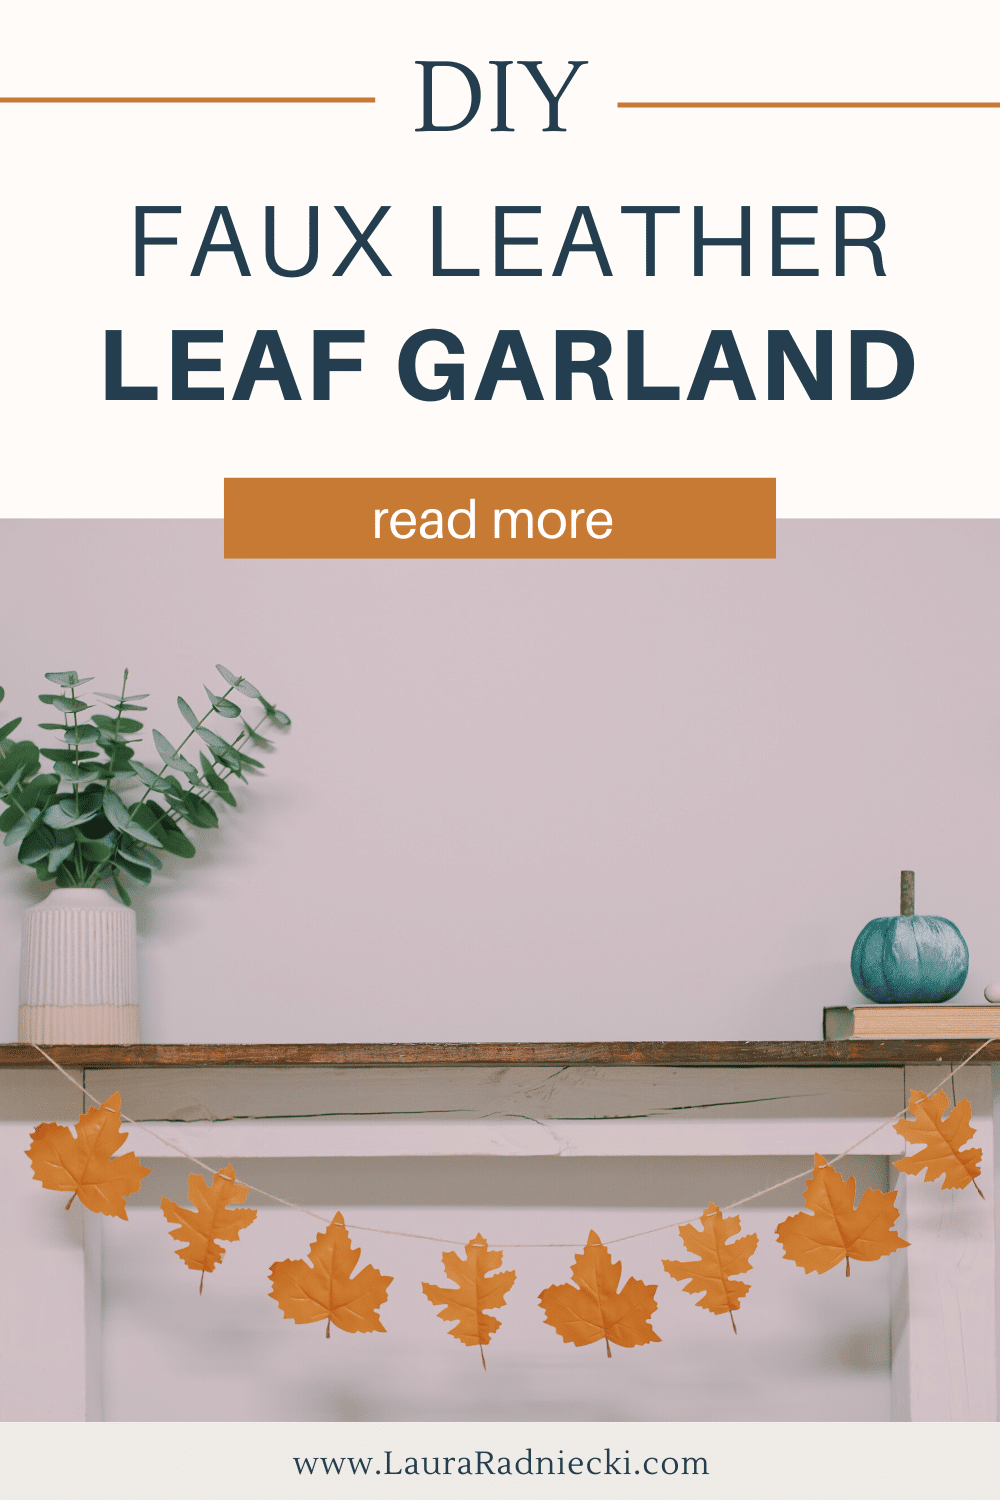 How to Make a Faux Leather Leaf Garland